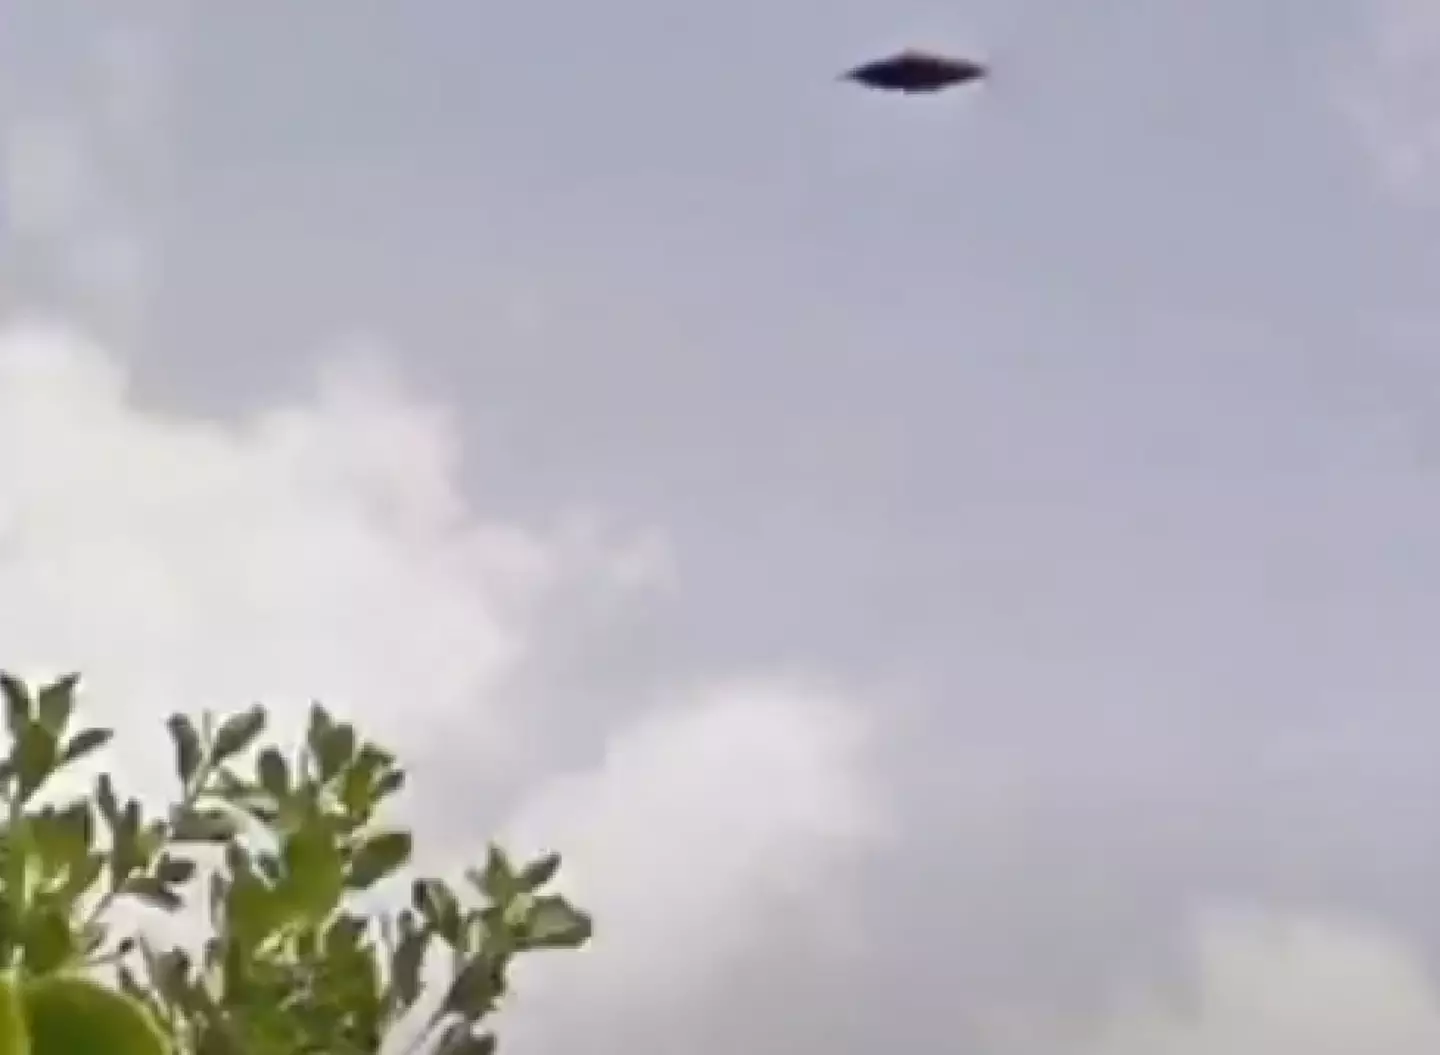 Is it a bird, a plane, or definitive proof that aliens are real?